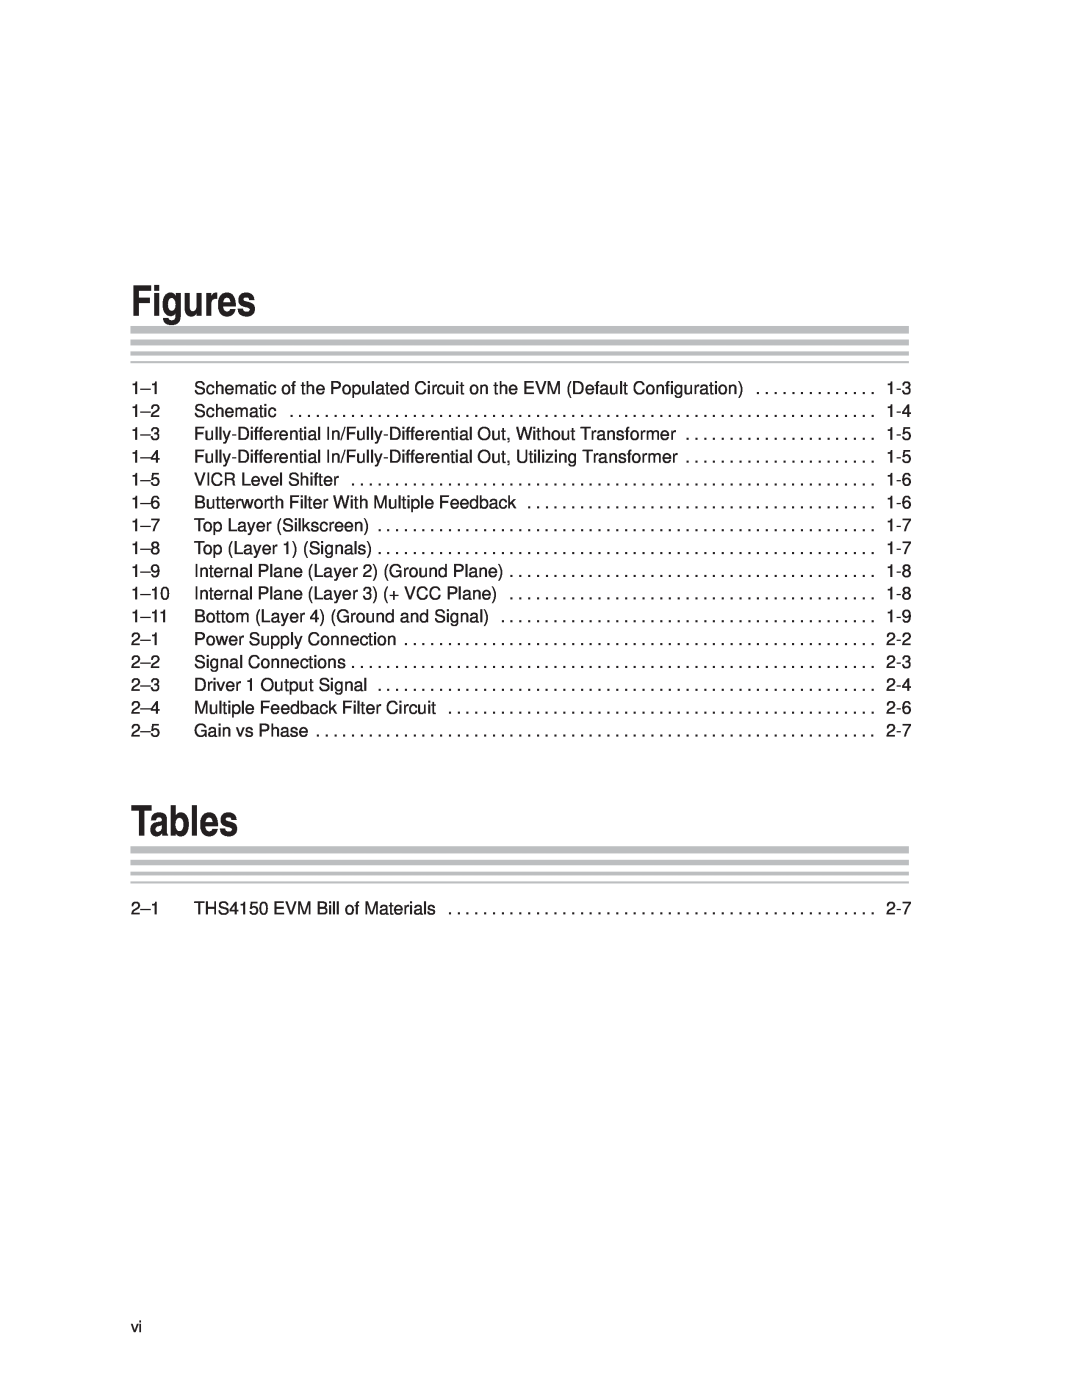 Texas Instruments THS4150 manual Figures, Tables 